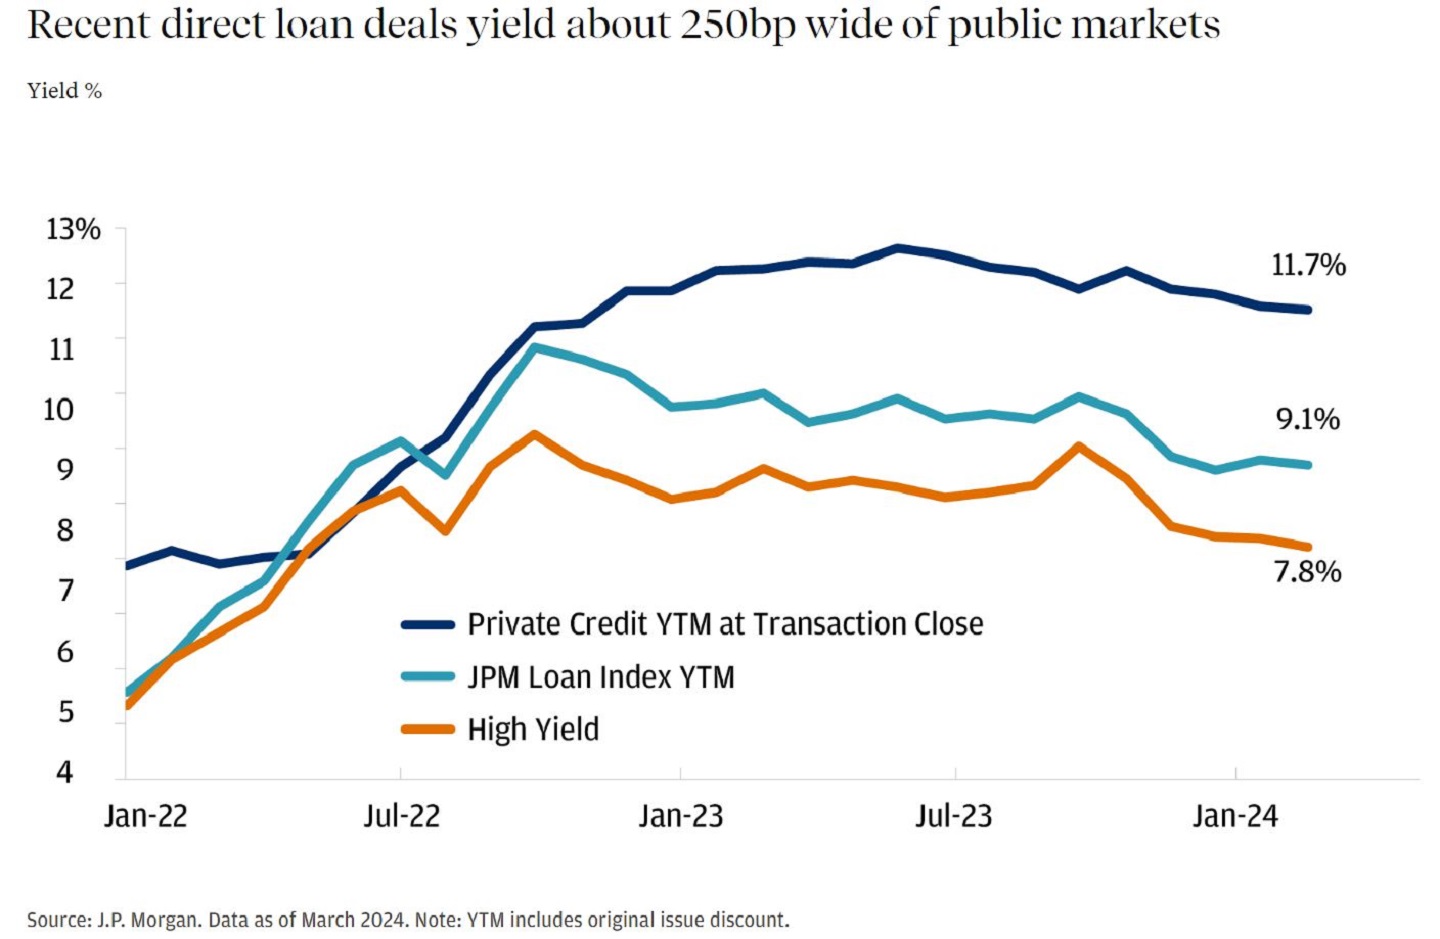 Line chart showing recent direct loan deals yield in percentages.